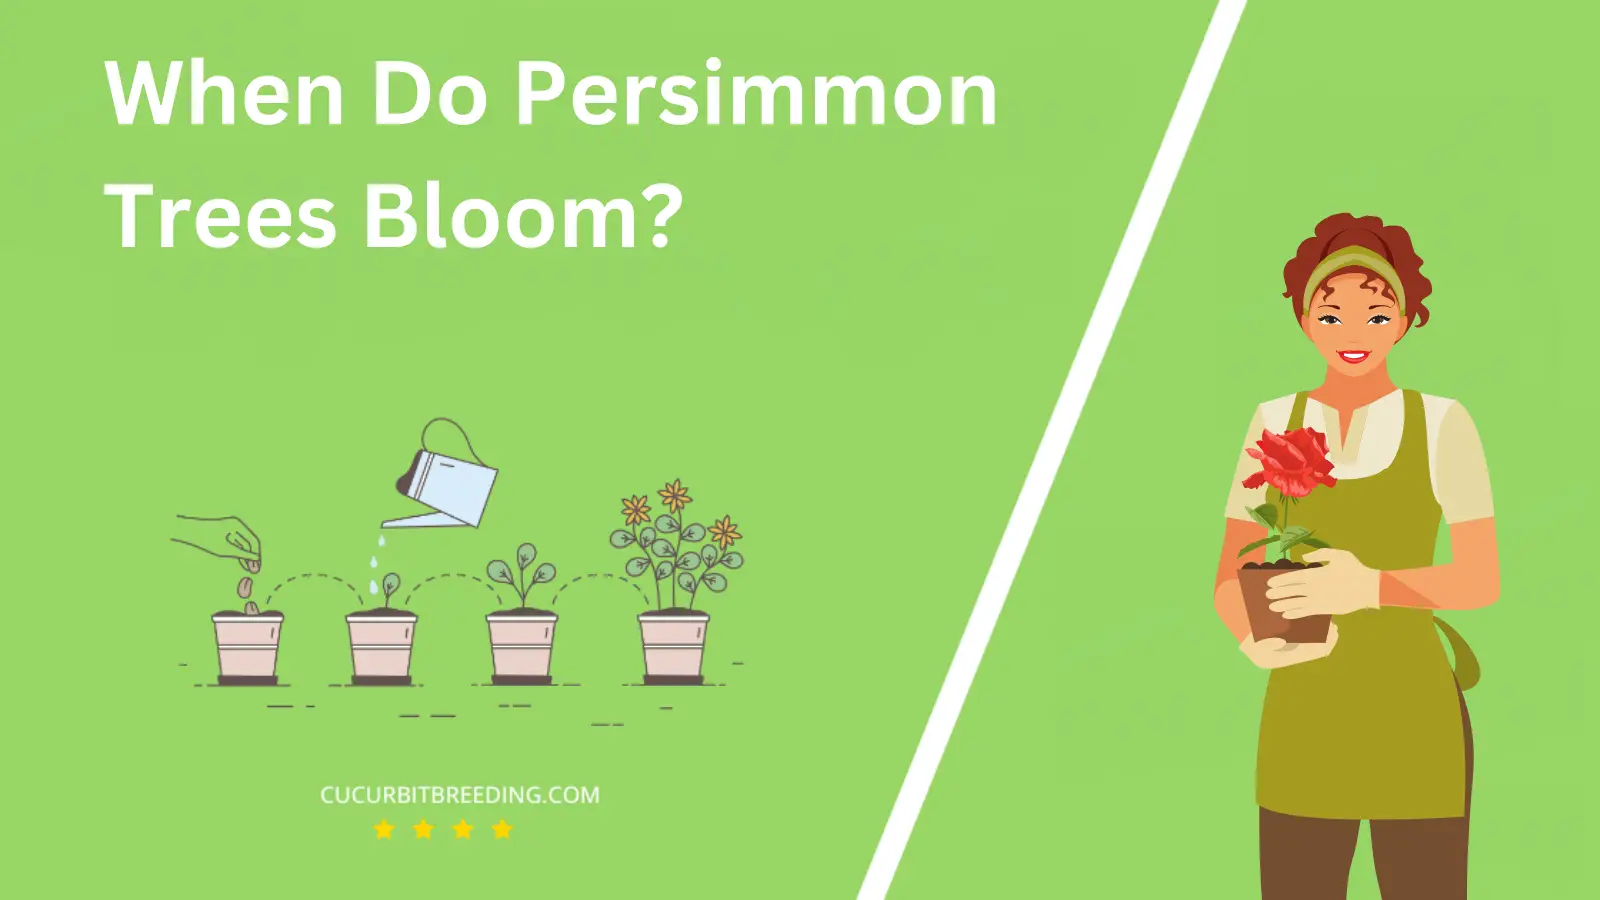 When Do Persimmon Trees Bloom?